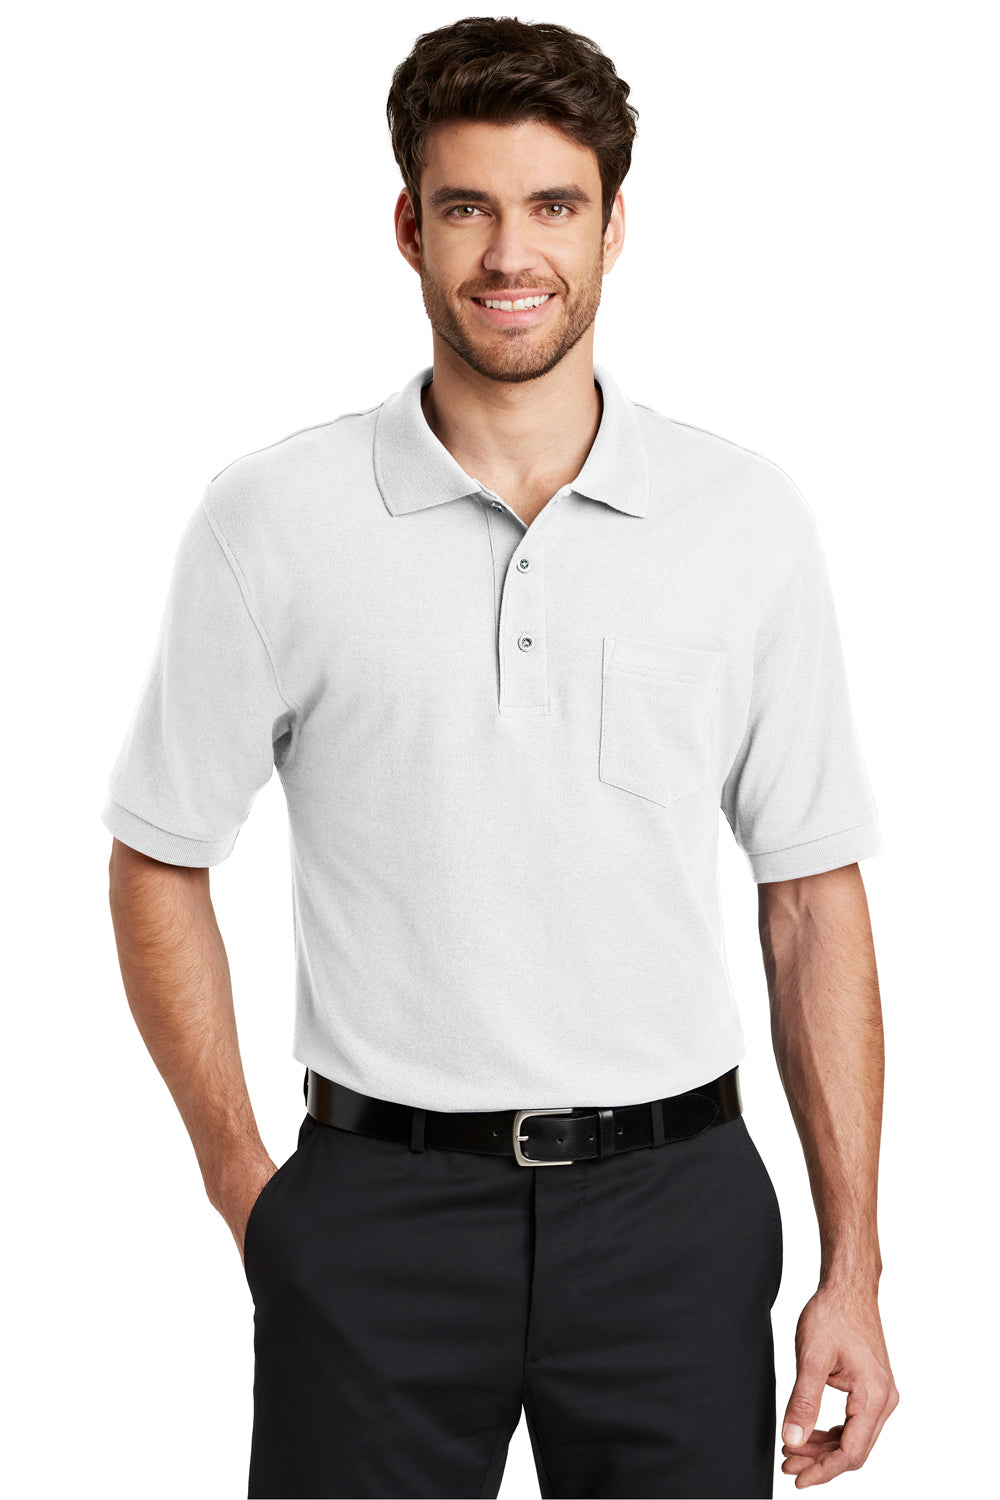 Port Authority K500P Mens Silk Touch Wrinkle Resistant Short Sleeve Polo Shirt w/ Pocket White Front